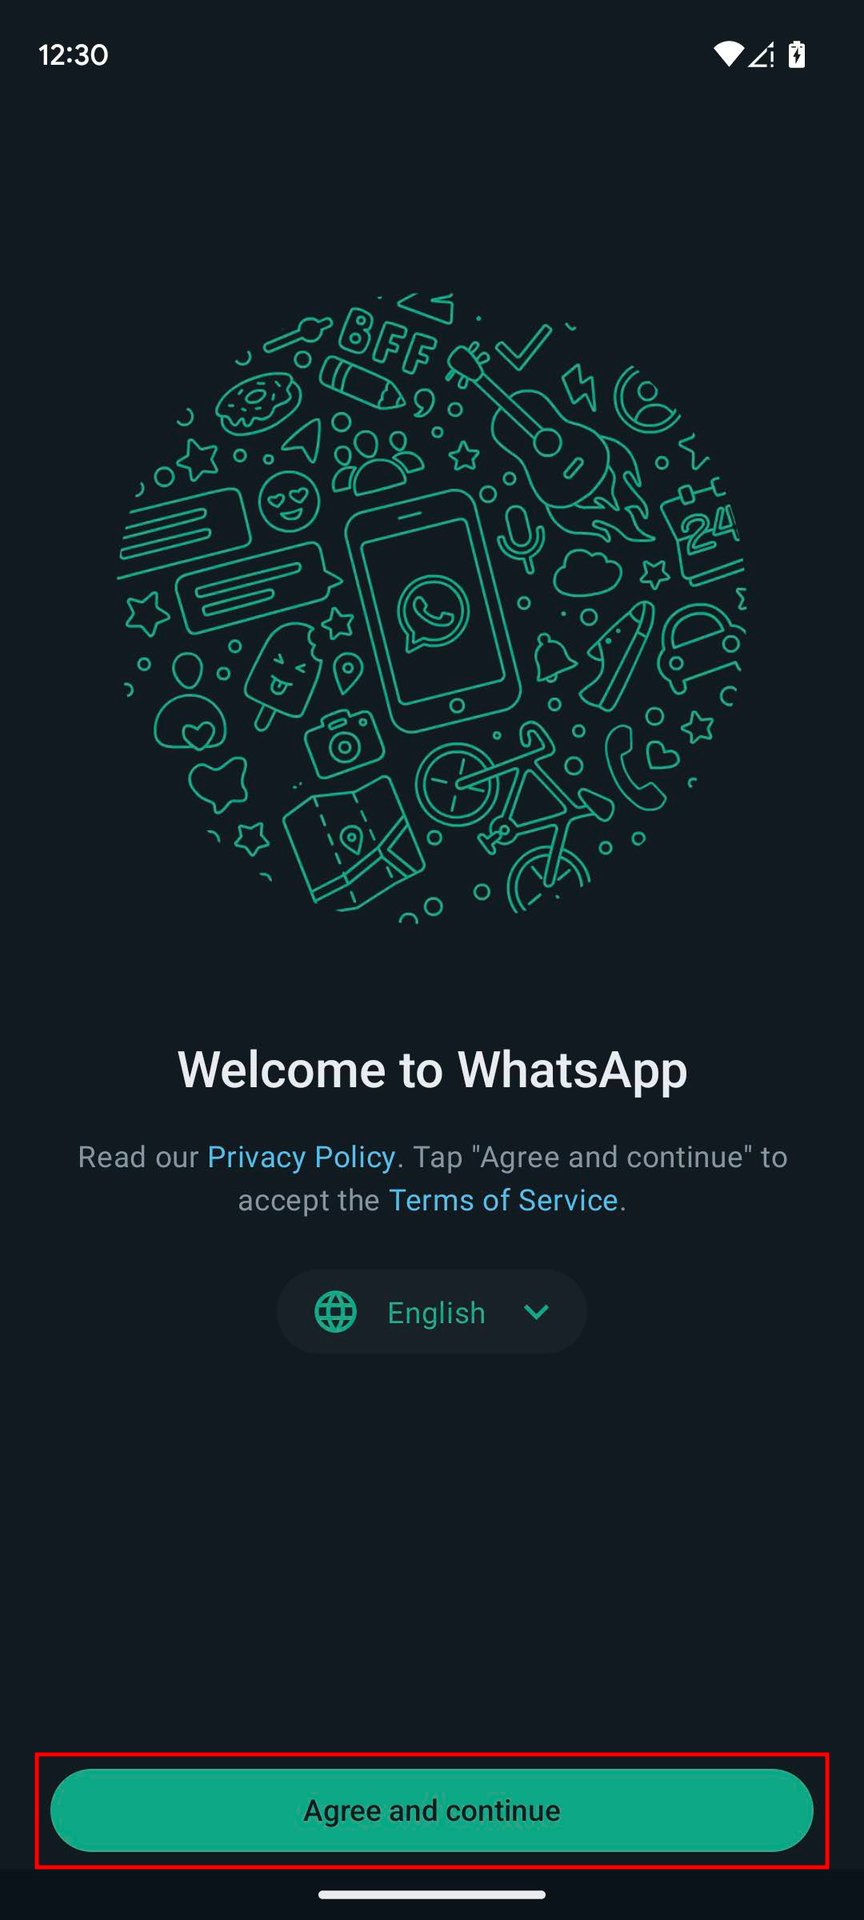 How to set up Android WhatsApp using a landline phone (2)